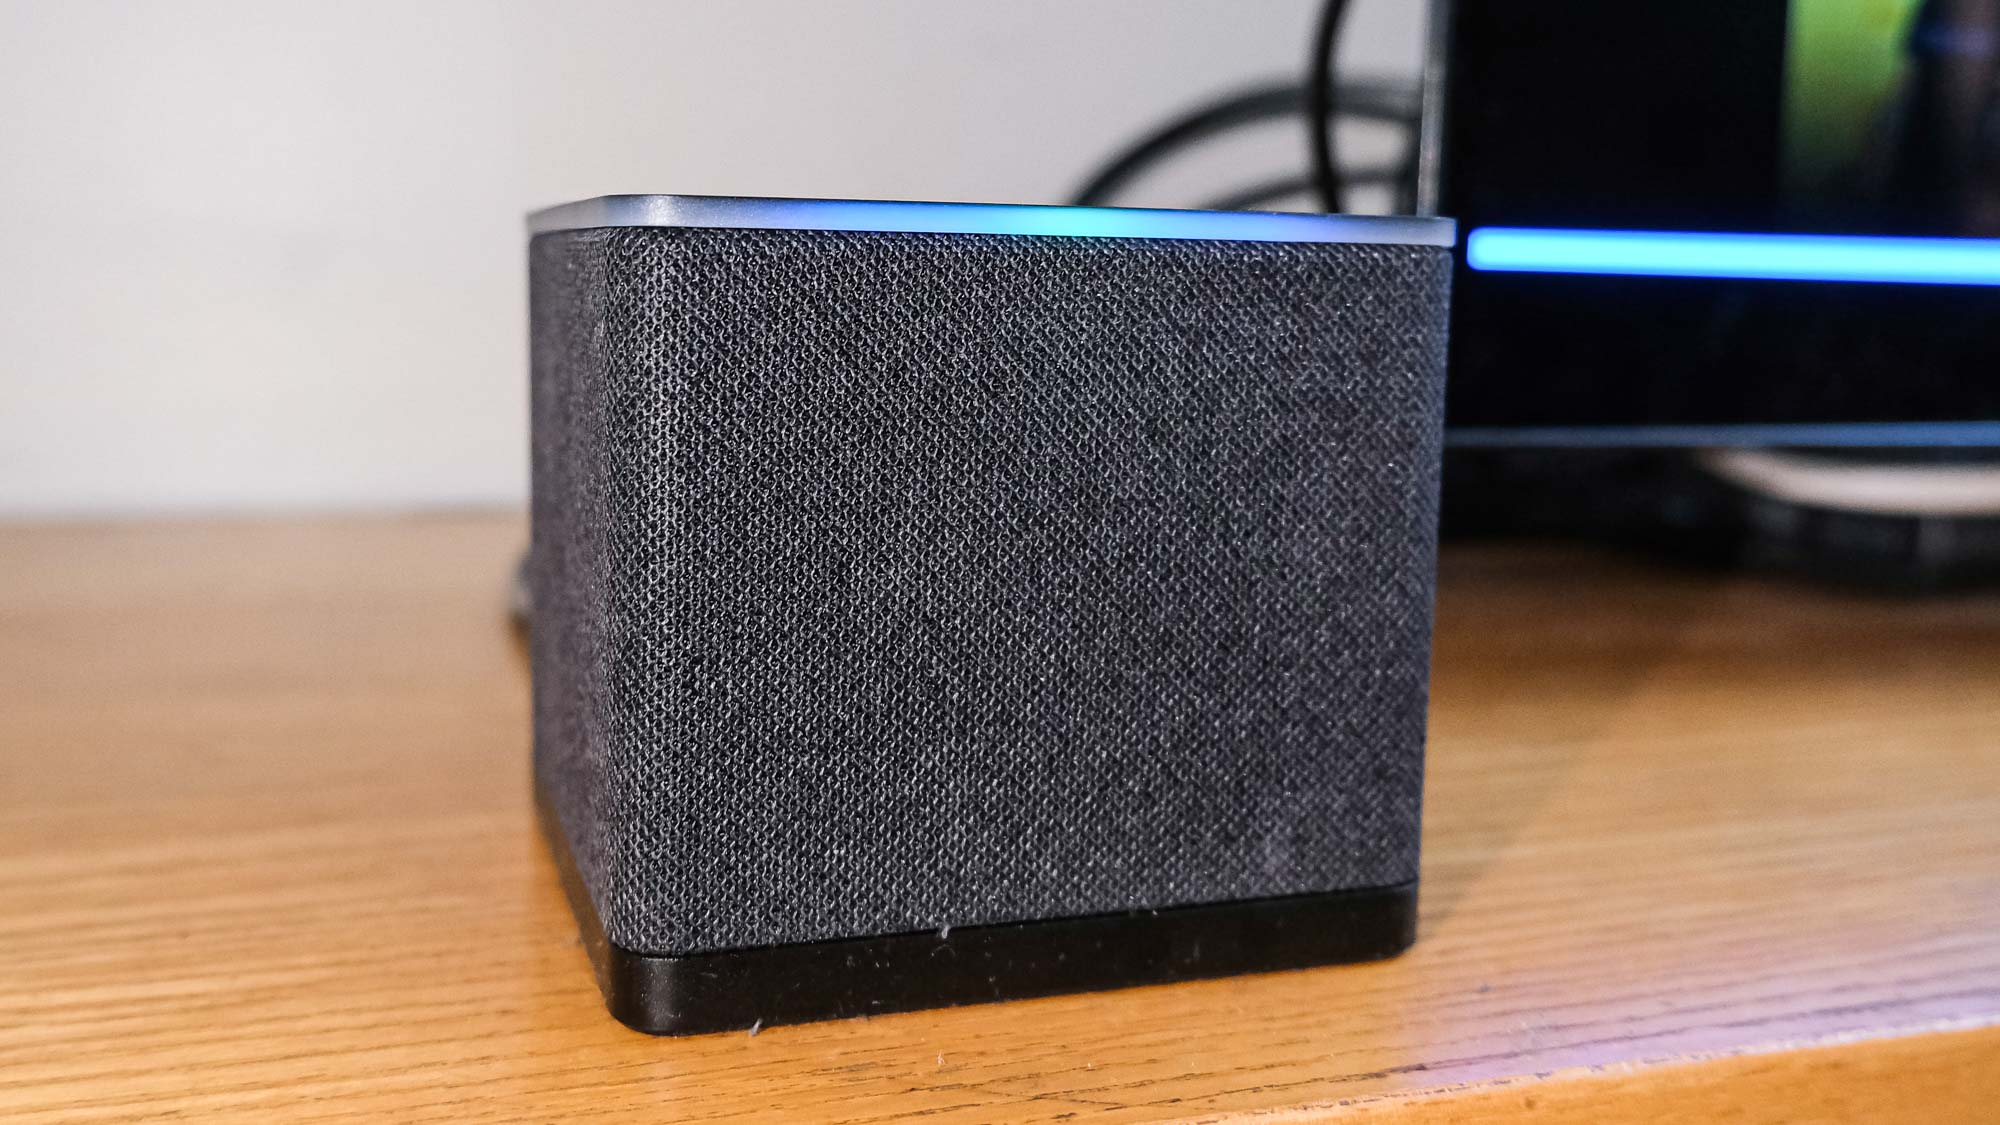 Fire TV Cube Review: Cut the Cord and Go Hands-Free